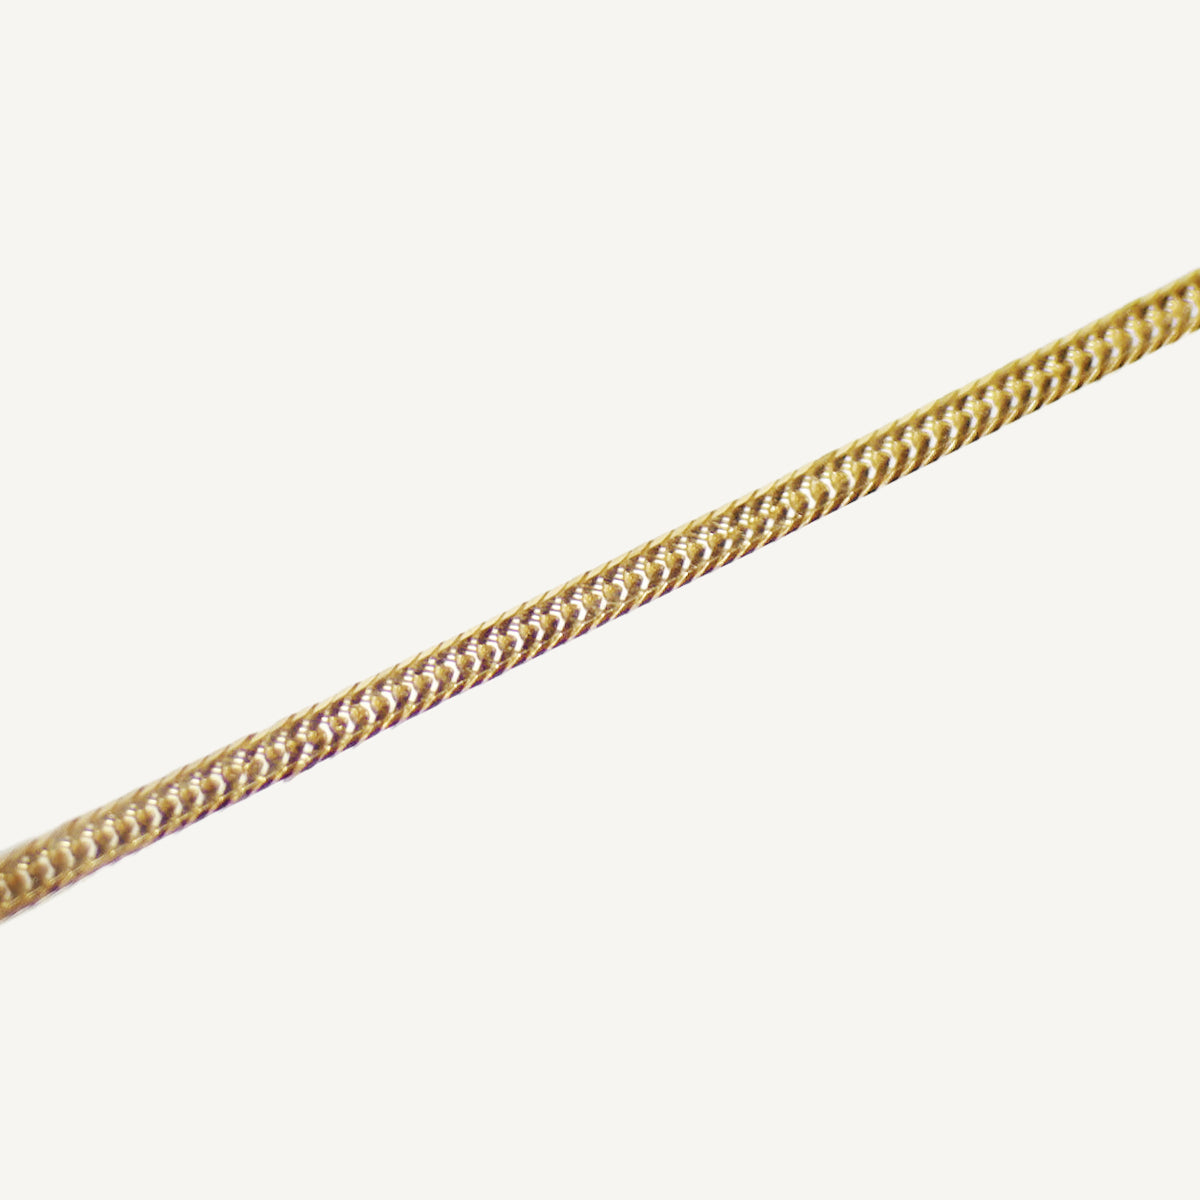 The Cuban Bracelet in Solid Gold